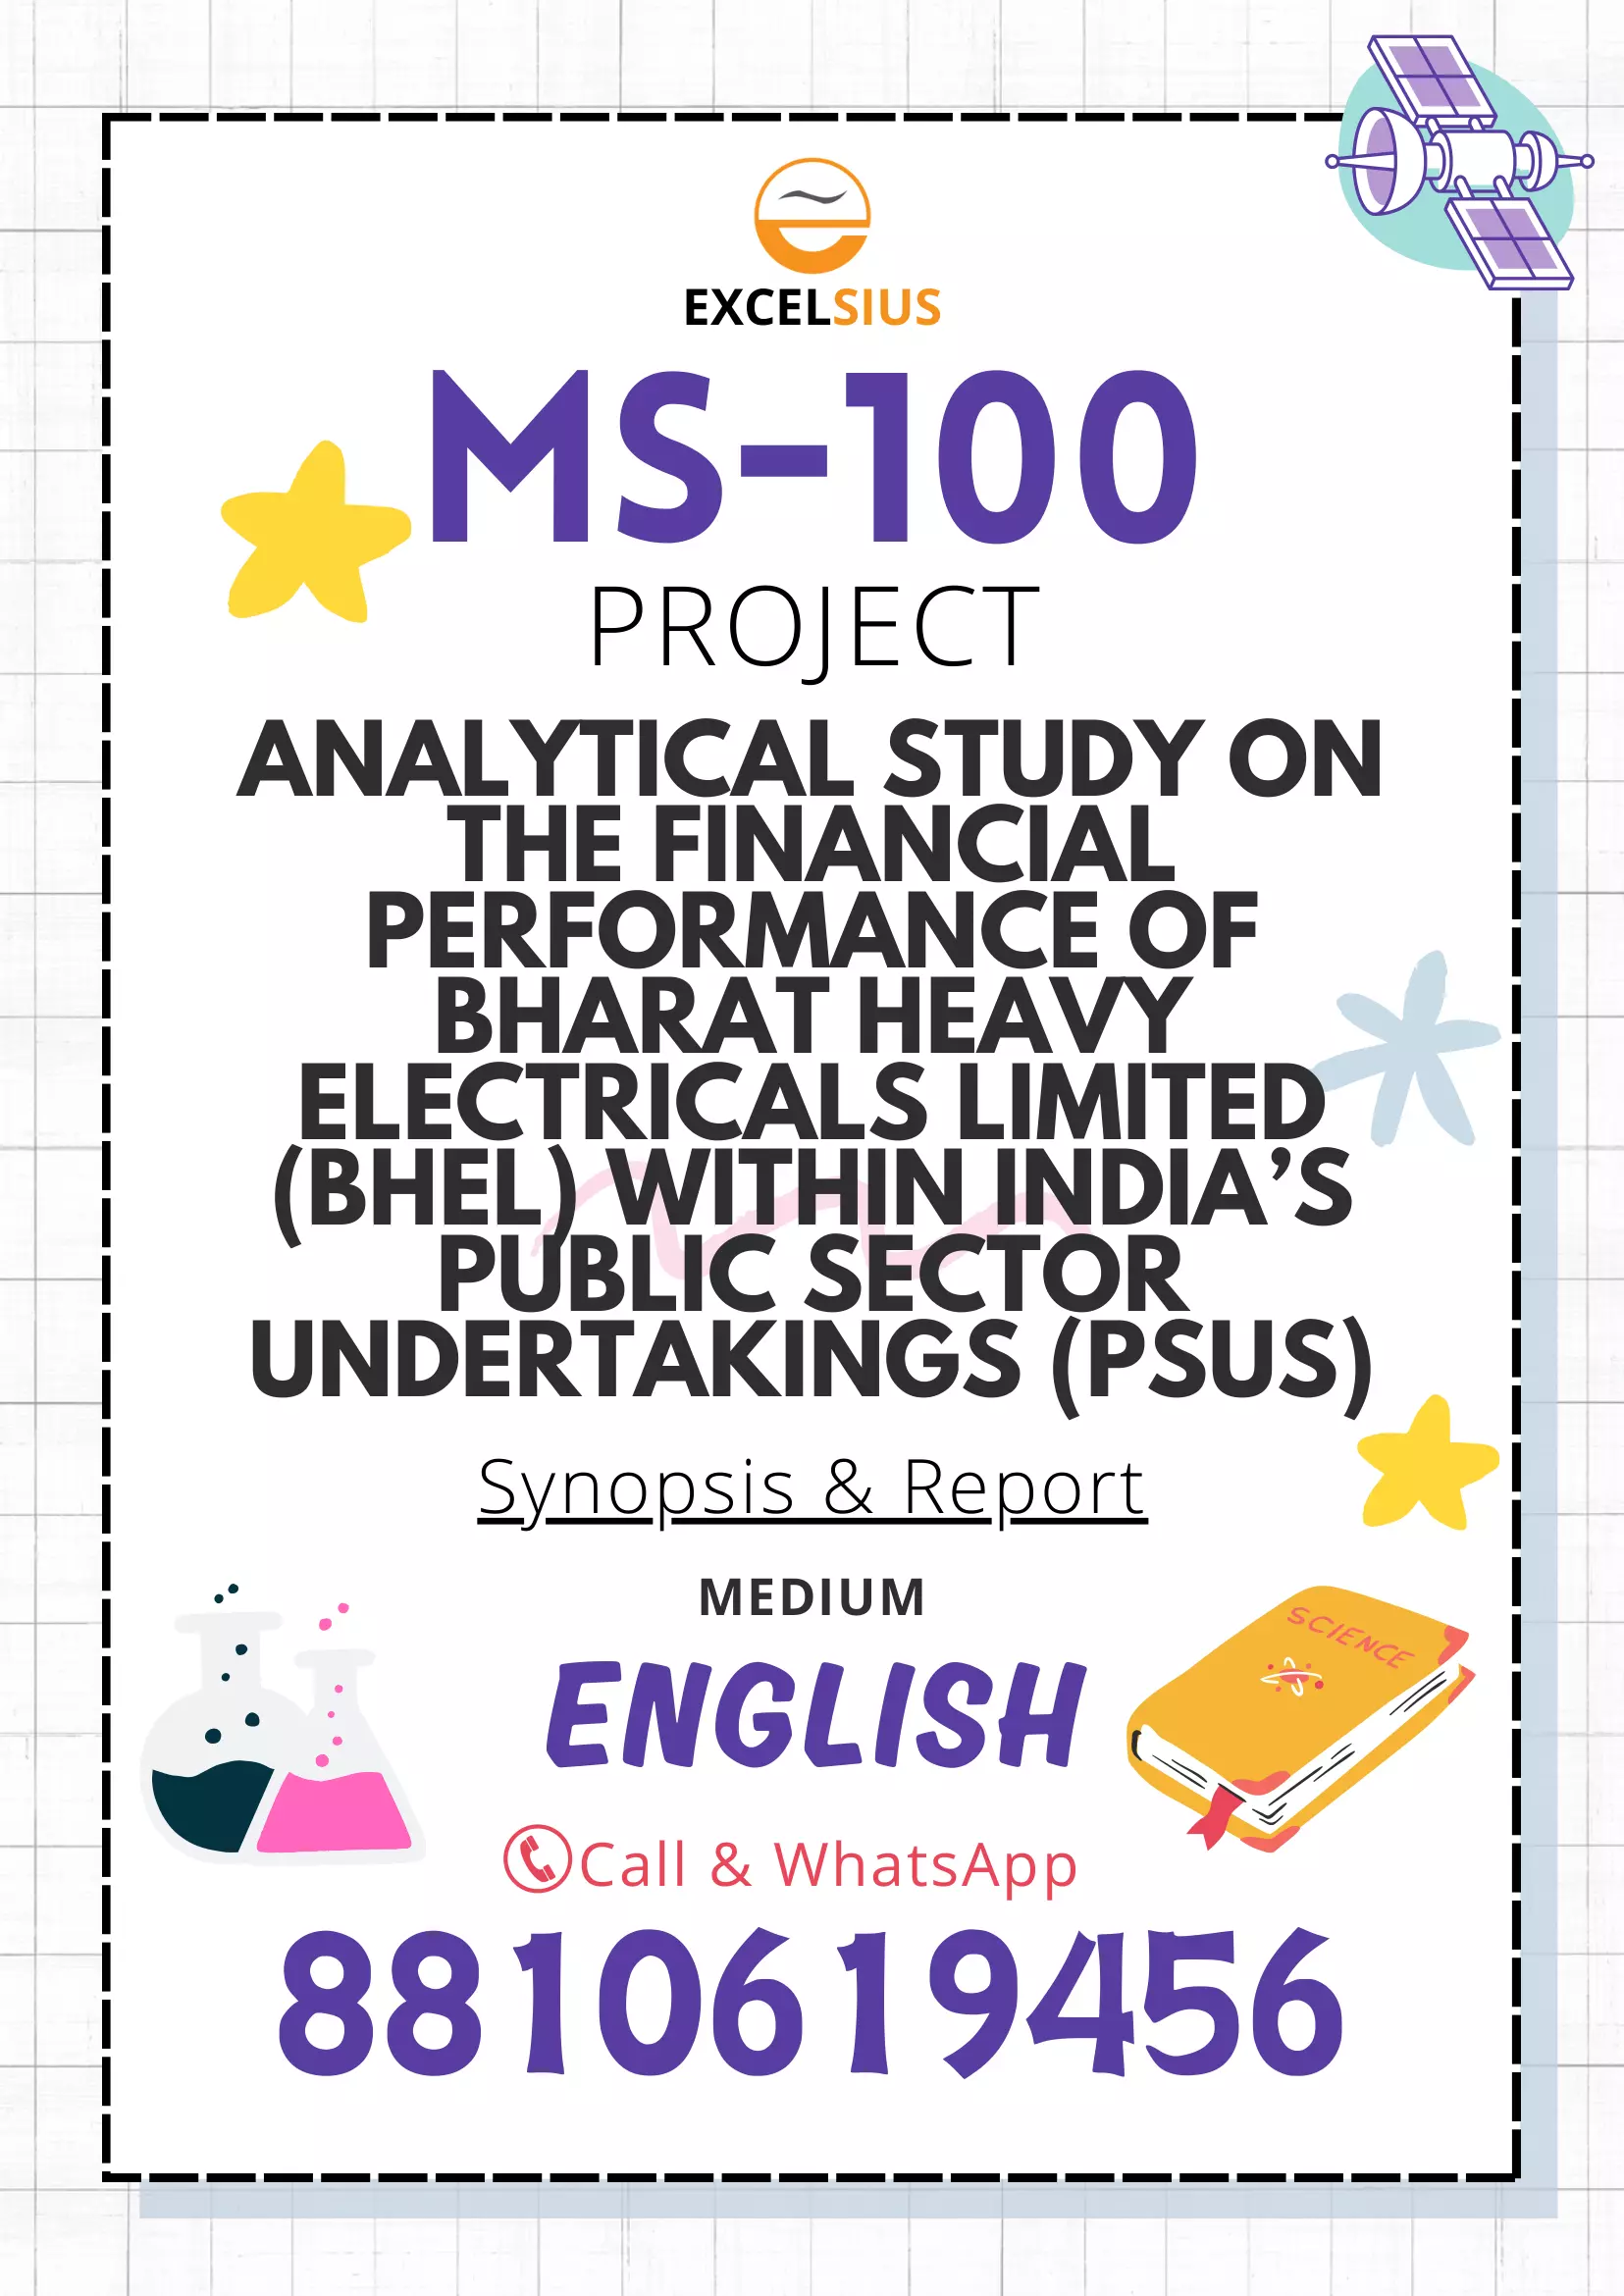 IGNOU MS-100 (Project) (BHEL) - Analytical Study on the Financial Performance of Bharat Heavy Electricals Limited (BHEL) within India’s Public Sector Undertakings (PSUs)-